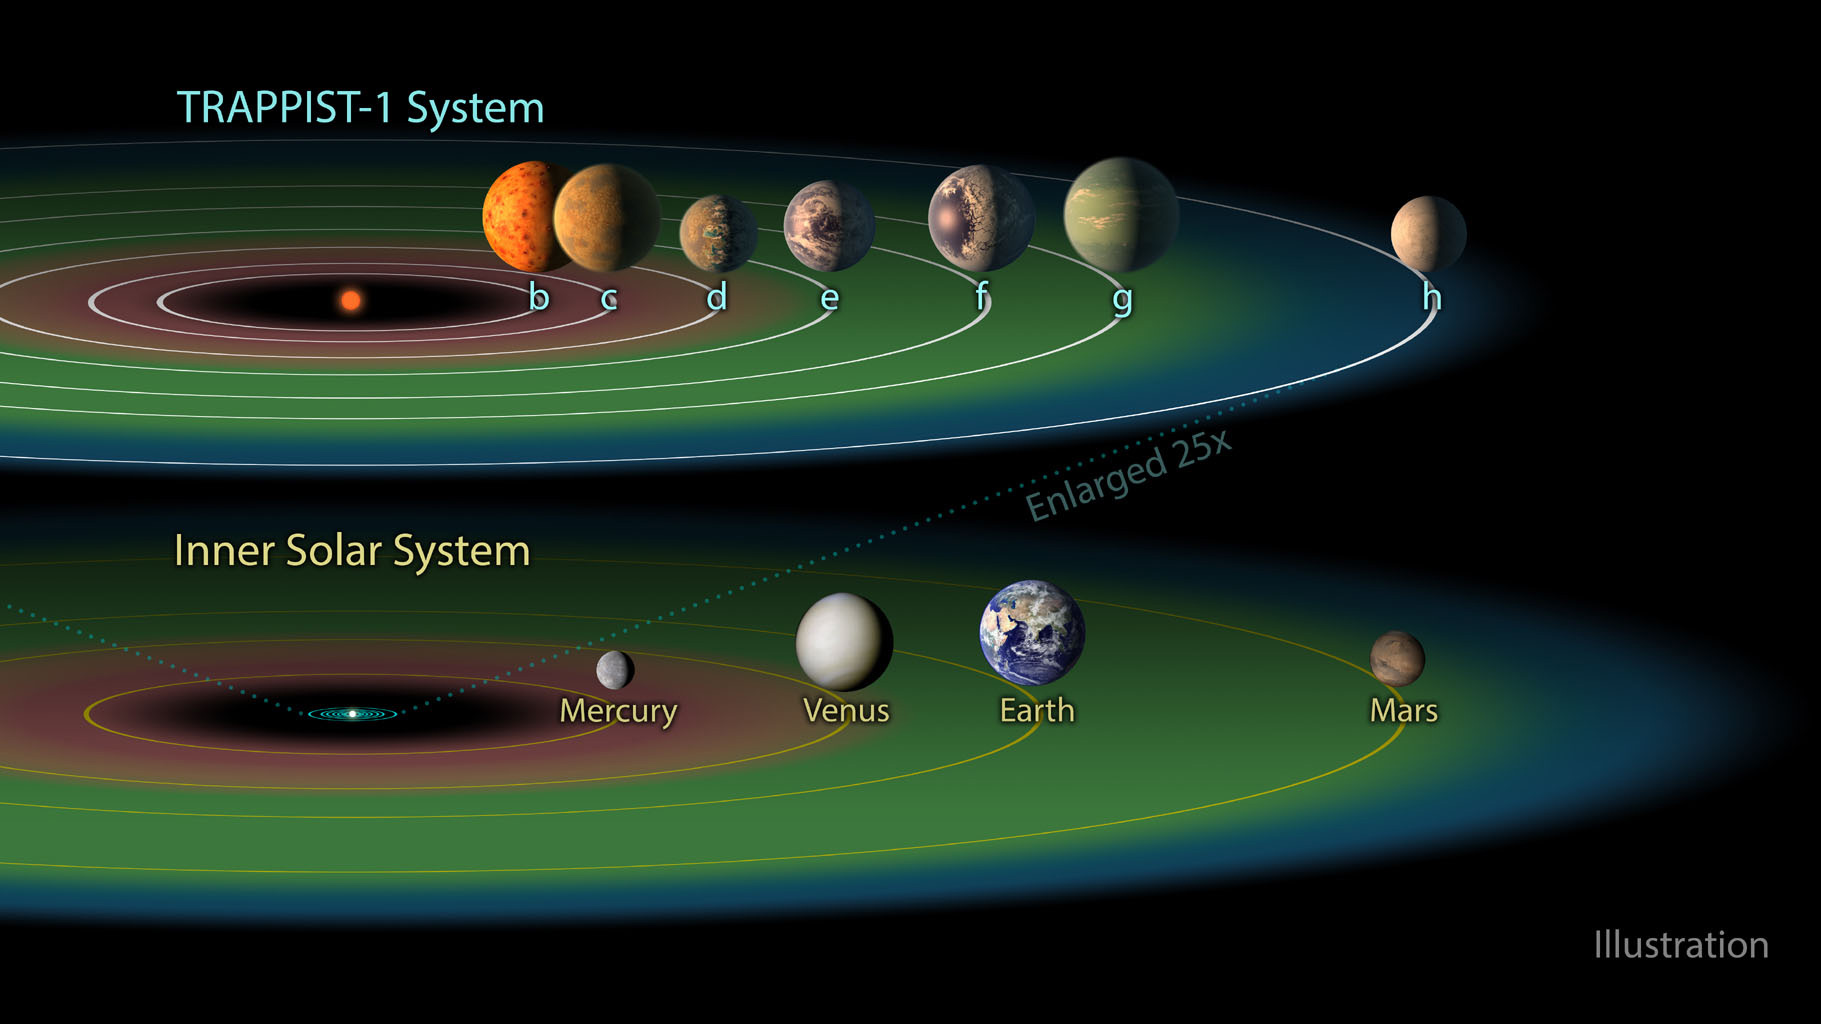 An illustration of the TRAPPIST-1 planetary system compared to the Inner Solar System.